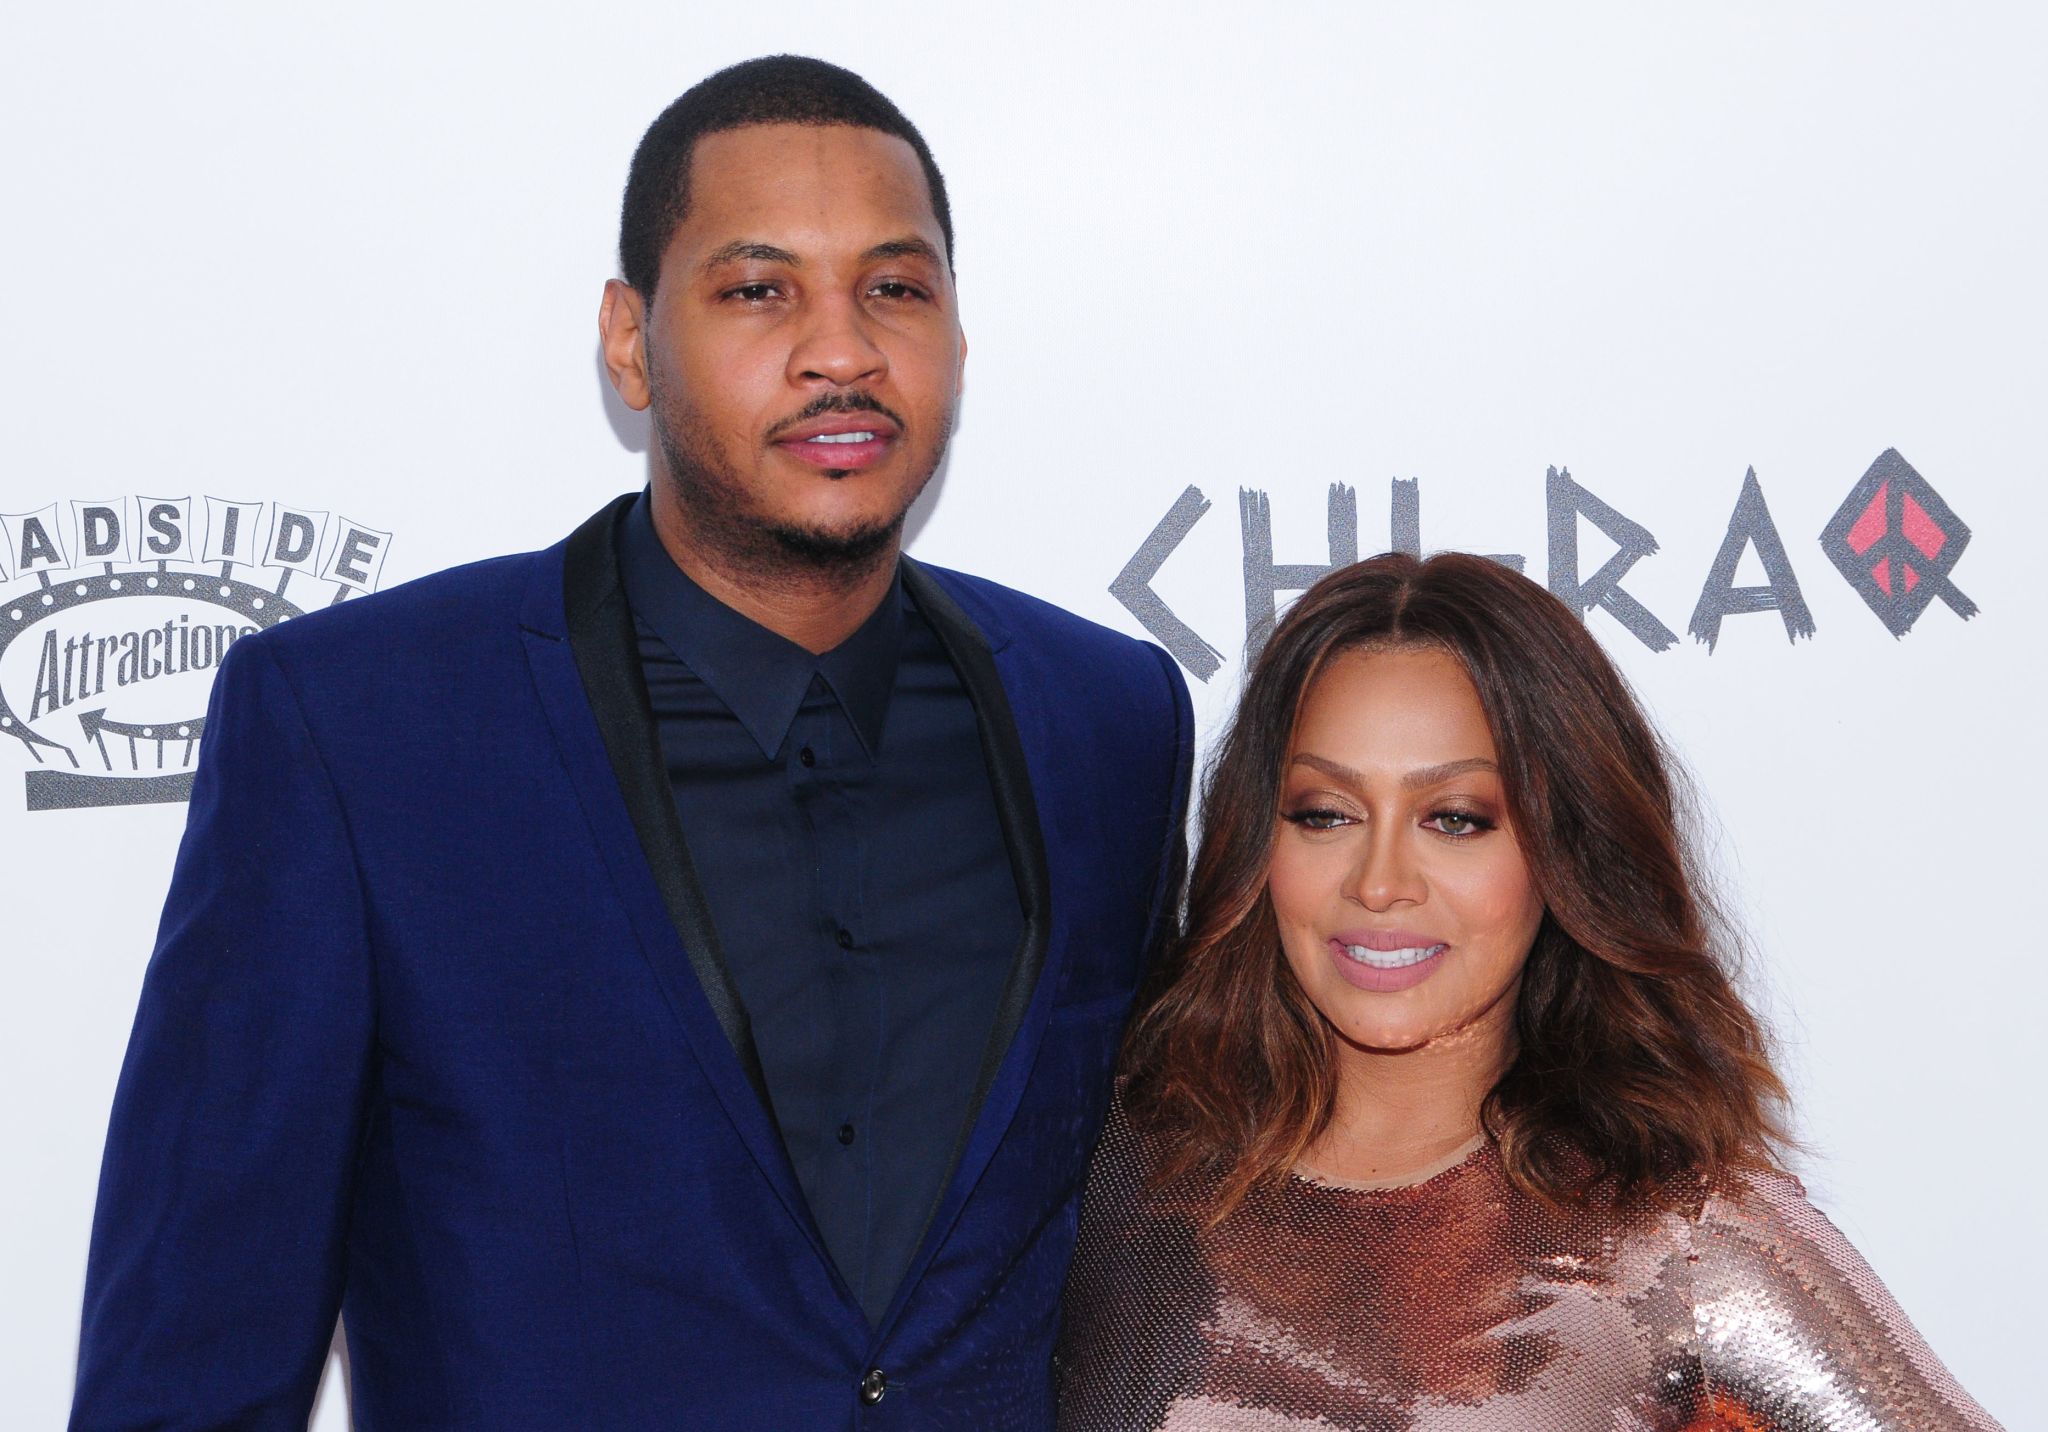 Carmelo Anthony Slams Cheating Claims After Suspect Photo Surfaces